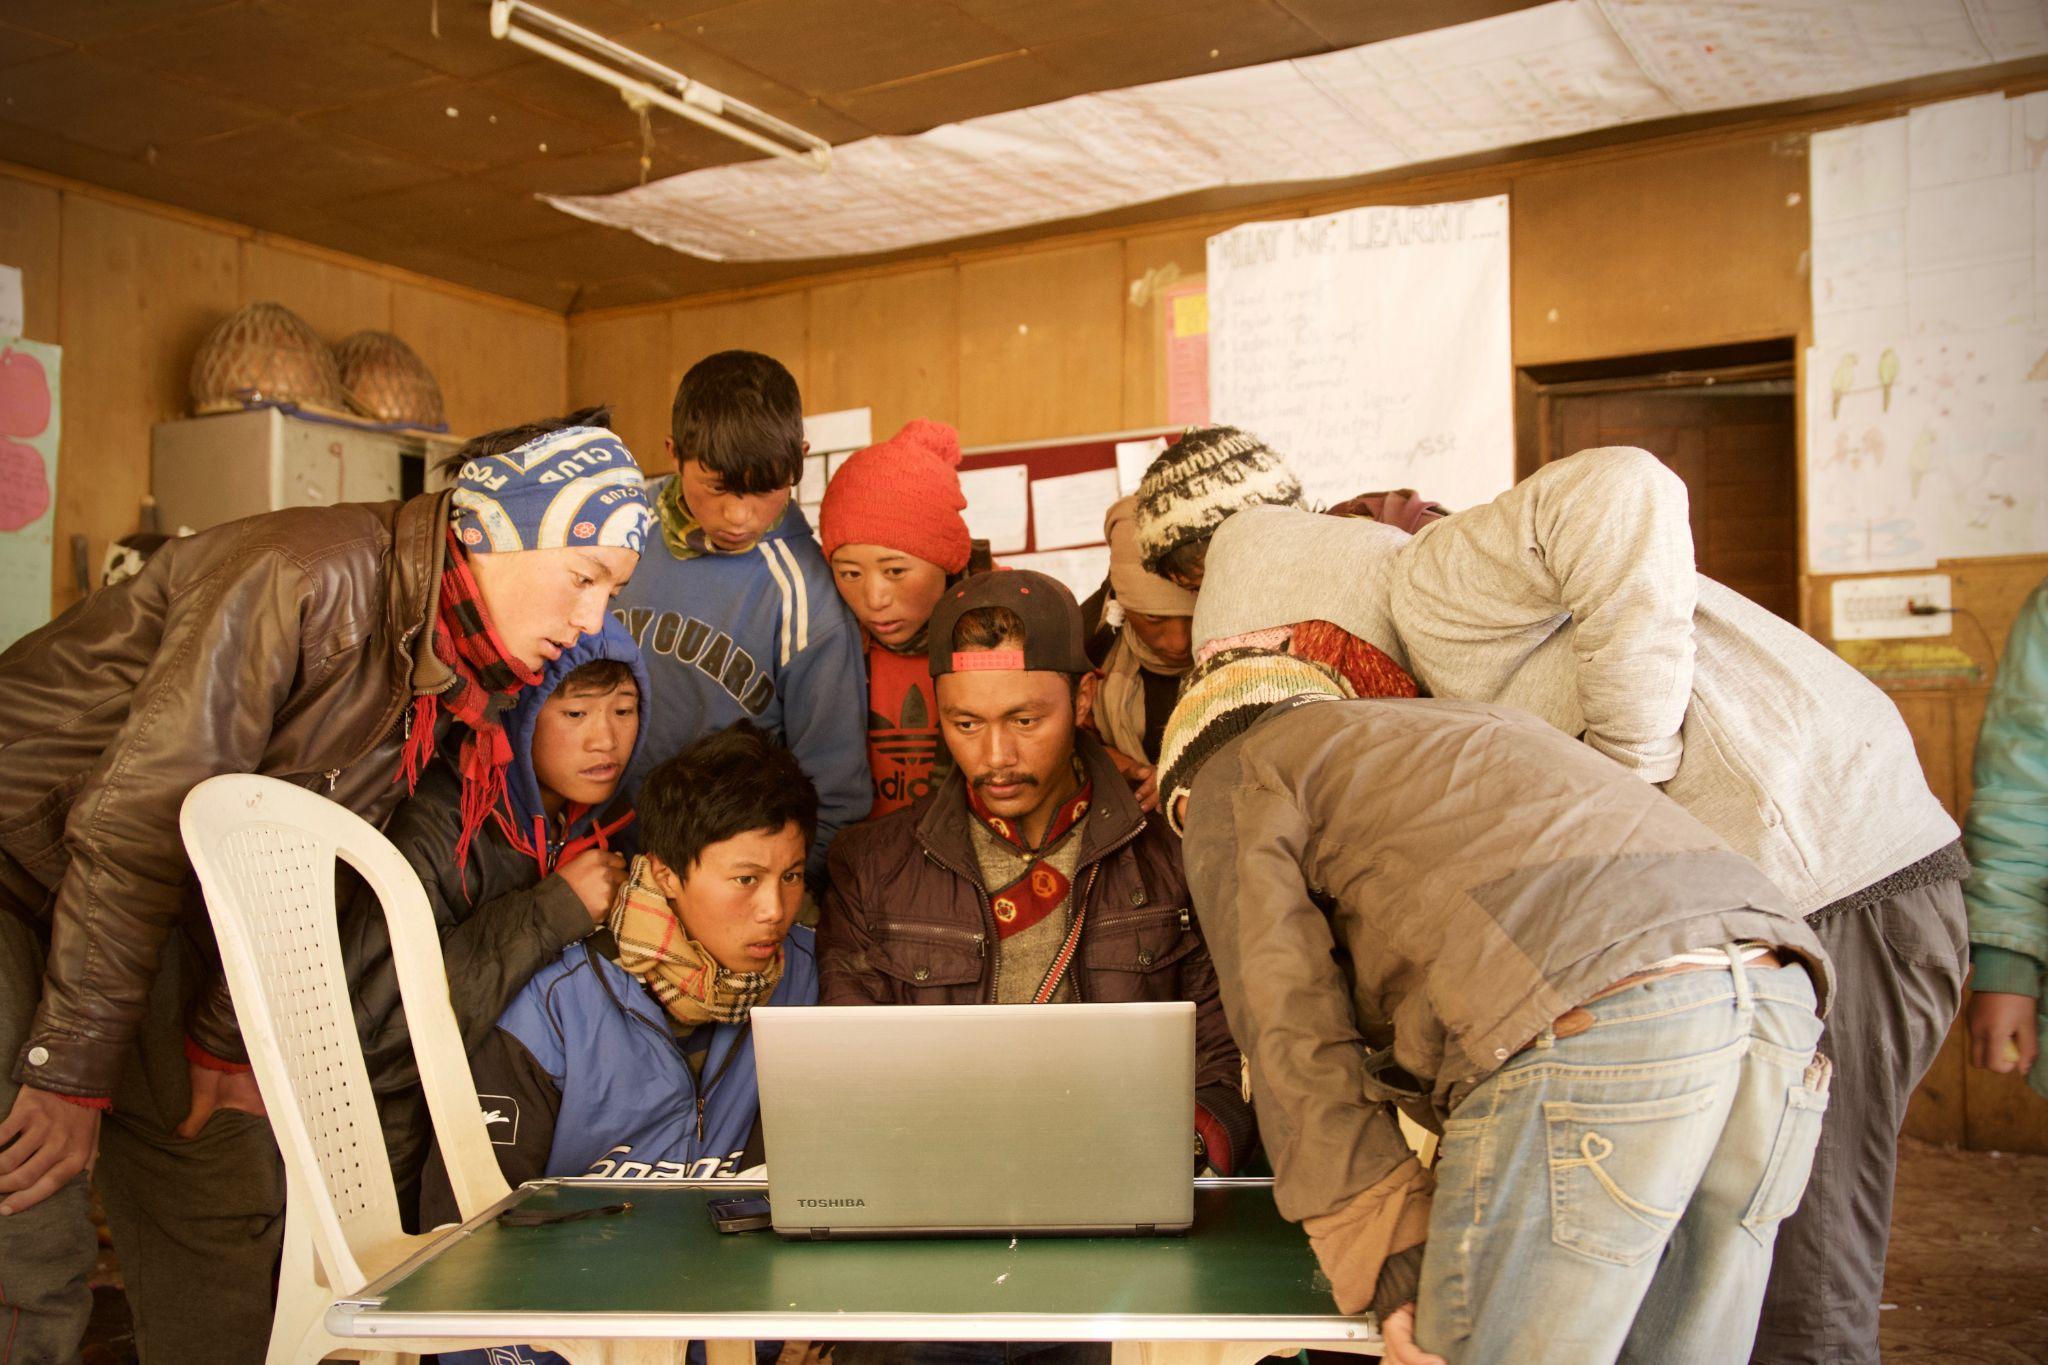 People gathering around a laptop standing on a simple table with a plastic chair on the left. The background looks like a school in a developing country.